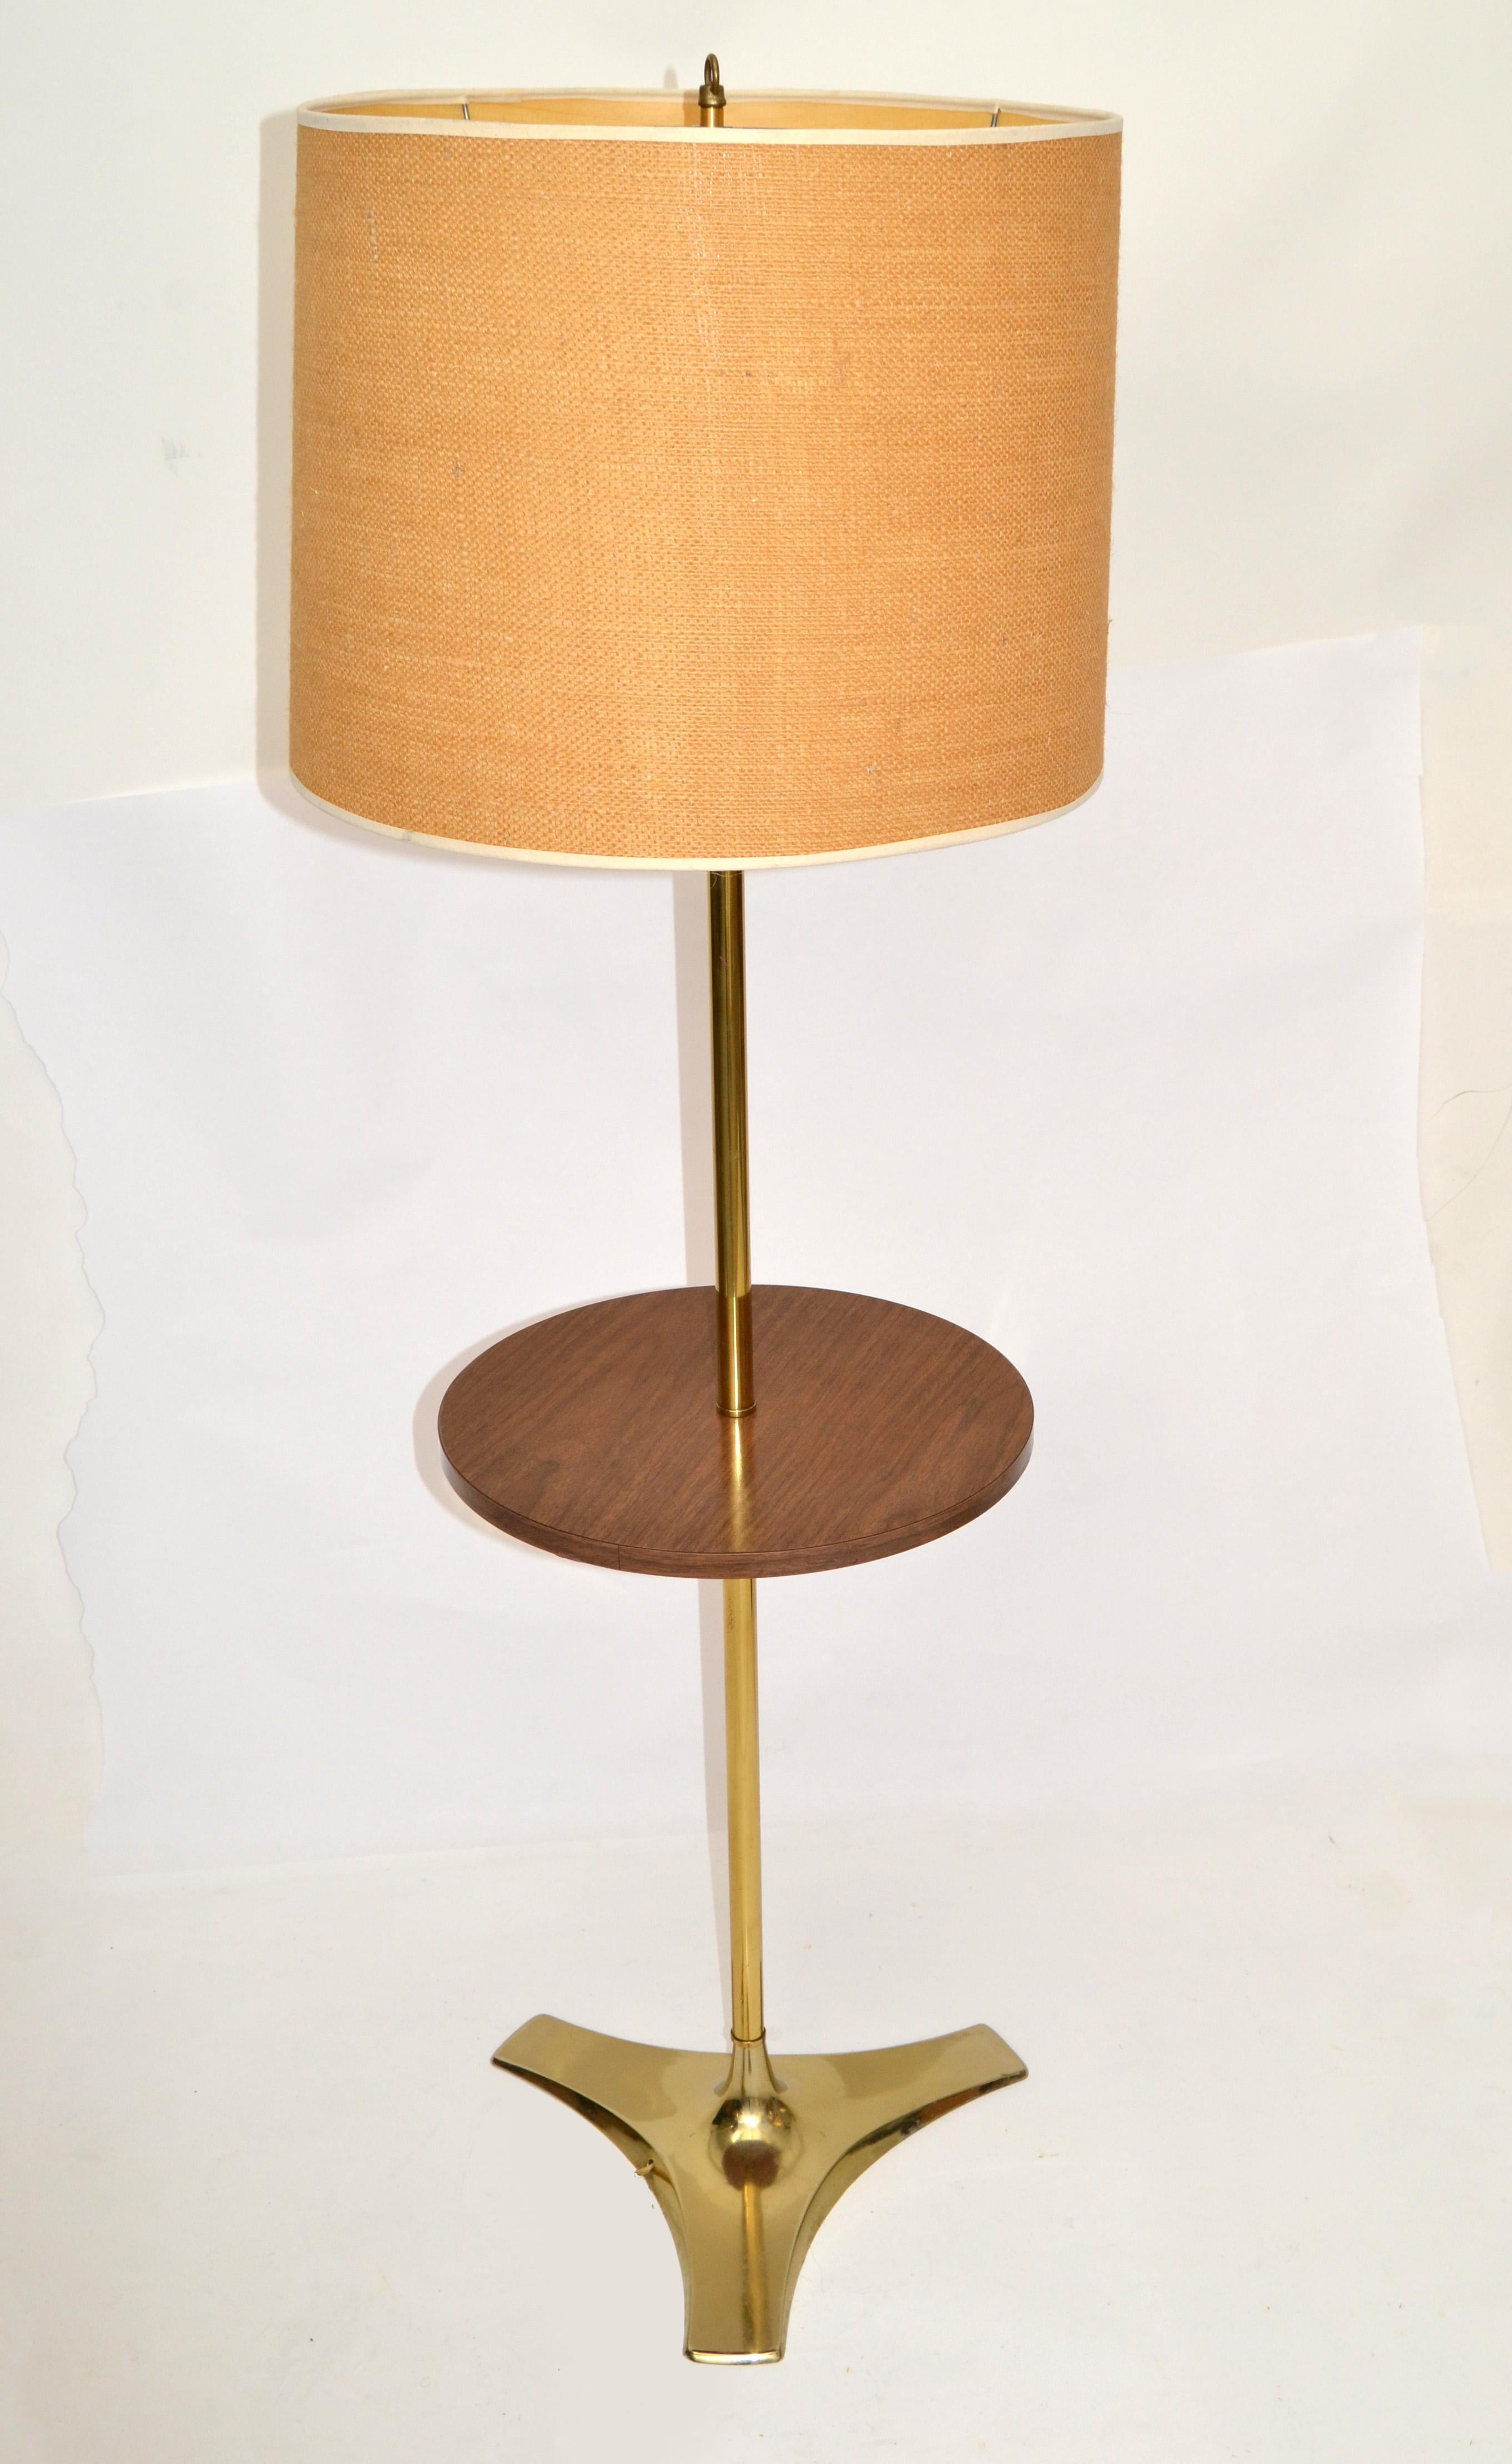 Vintage brass round side table floor lamp made by Laurel Lamp Company. 
Features a cast brass tripod base, stem and round Laminate Wood Side Table.
Comes with this beautiful vintage Shade.
US Rewiring and takes 1 regular or LED Light.
Shade